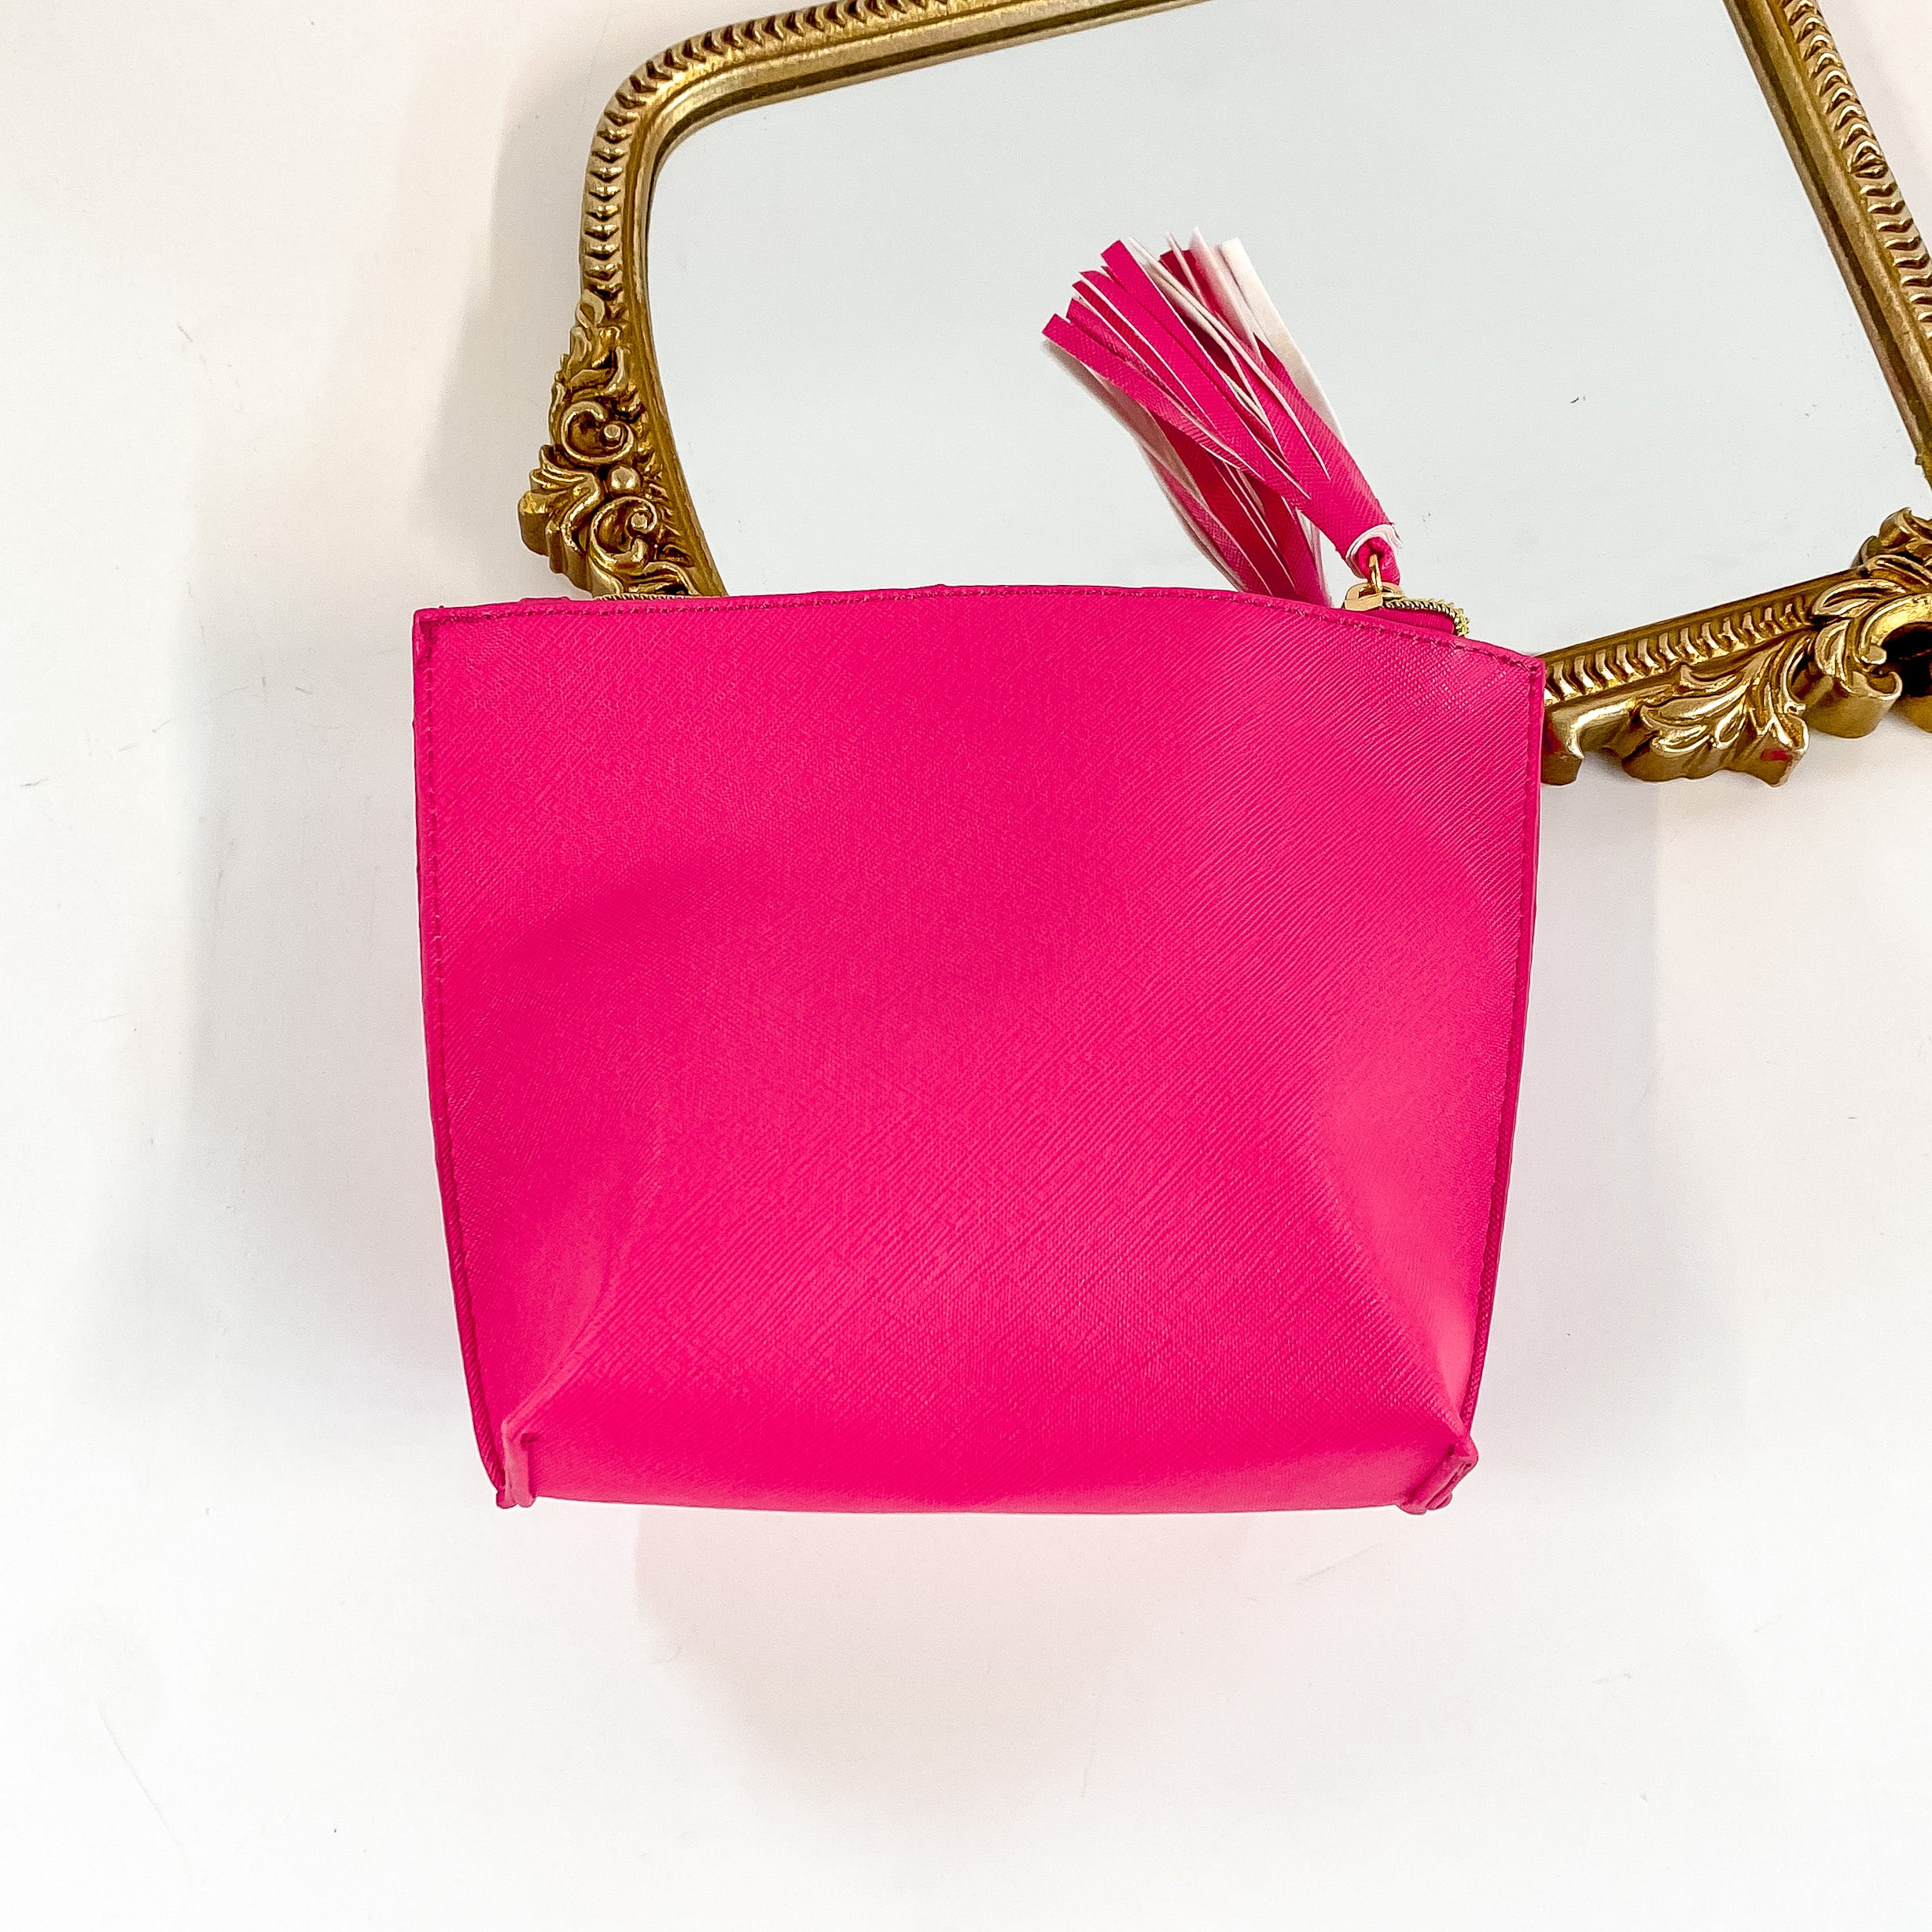 Hollis | Holy Chic Bag in Hot Pink - Giddy Up Glamour Boutique